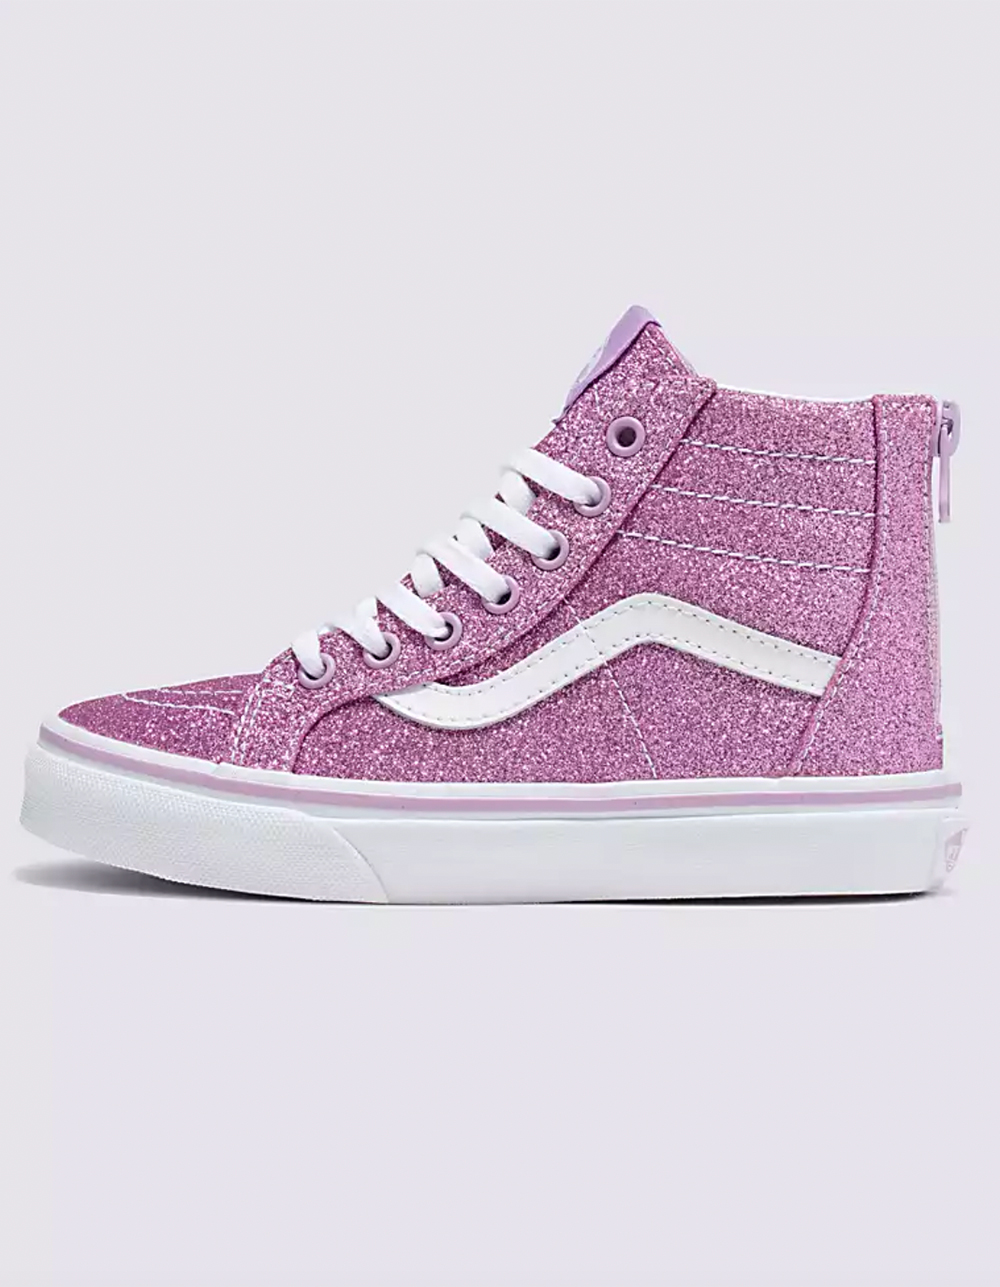 Neon pink High top vans  Sneakers fashion, Sneaker boots, Cute shoes